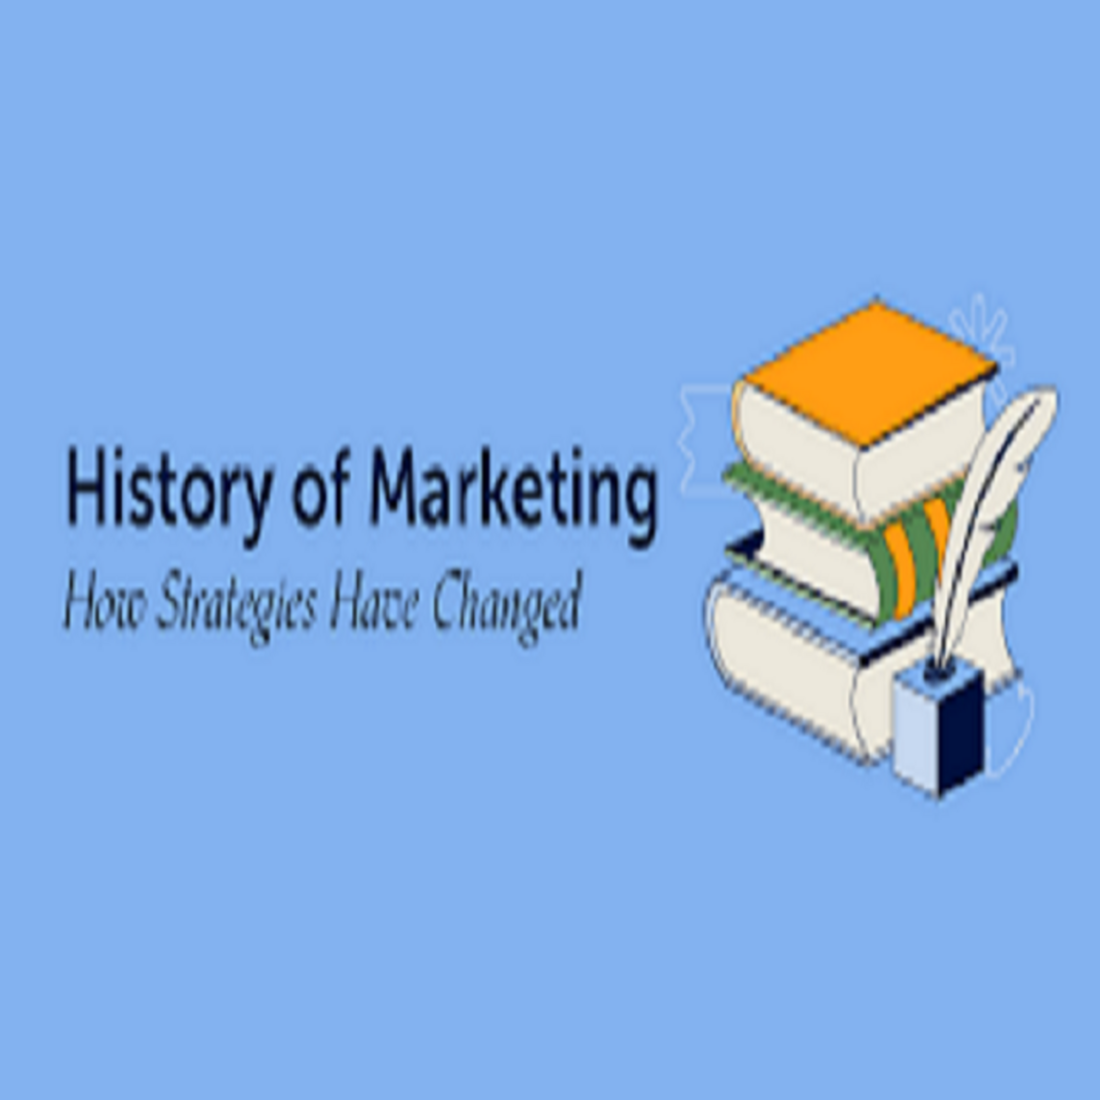 history of marketing preview image.